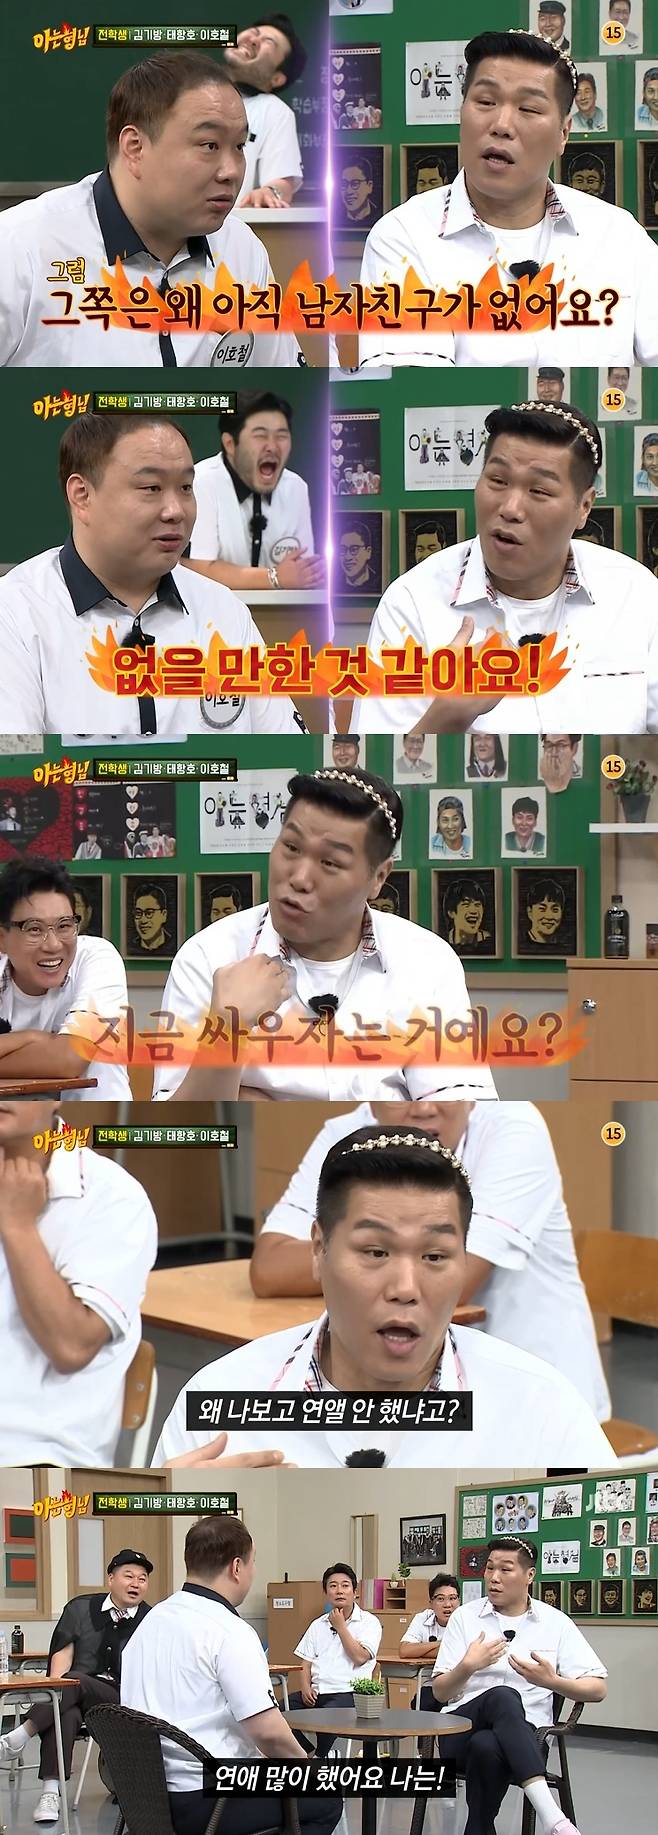 Former basketball player Seo Jang-hoon self-destructed that he did more than love.On JTBCs Knowing Bros broadcast on June 19, Seo Jang-hoon indirectly mentioned Boyns divorce.Seo Jang-hoon welcomed Kim Ki-bang, Taehangho, and Ho-Chul Lee, who appeared as transfer students; and then went on a blind date with Ho-Chul Lee, who had a long break from dating.Seo Jang-hoon transformed into a south rose and greeted Ho-Chul Lee.Why did not you love? He then told Ho-Chul Lee, I was guilty.So Ho-Chul Lee also wondered, Why dont you have a boyfriend? I dont think so. Did you pay for your headband? Seo Jang-hoon said, Are you fighting now?I had a lot of love, even more than love, he said.